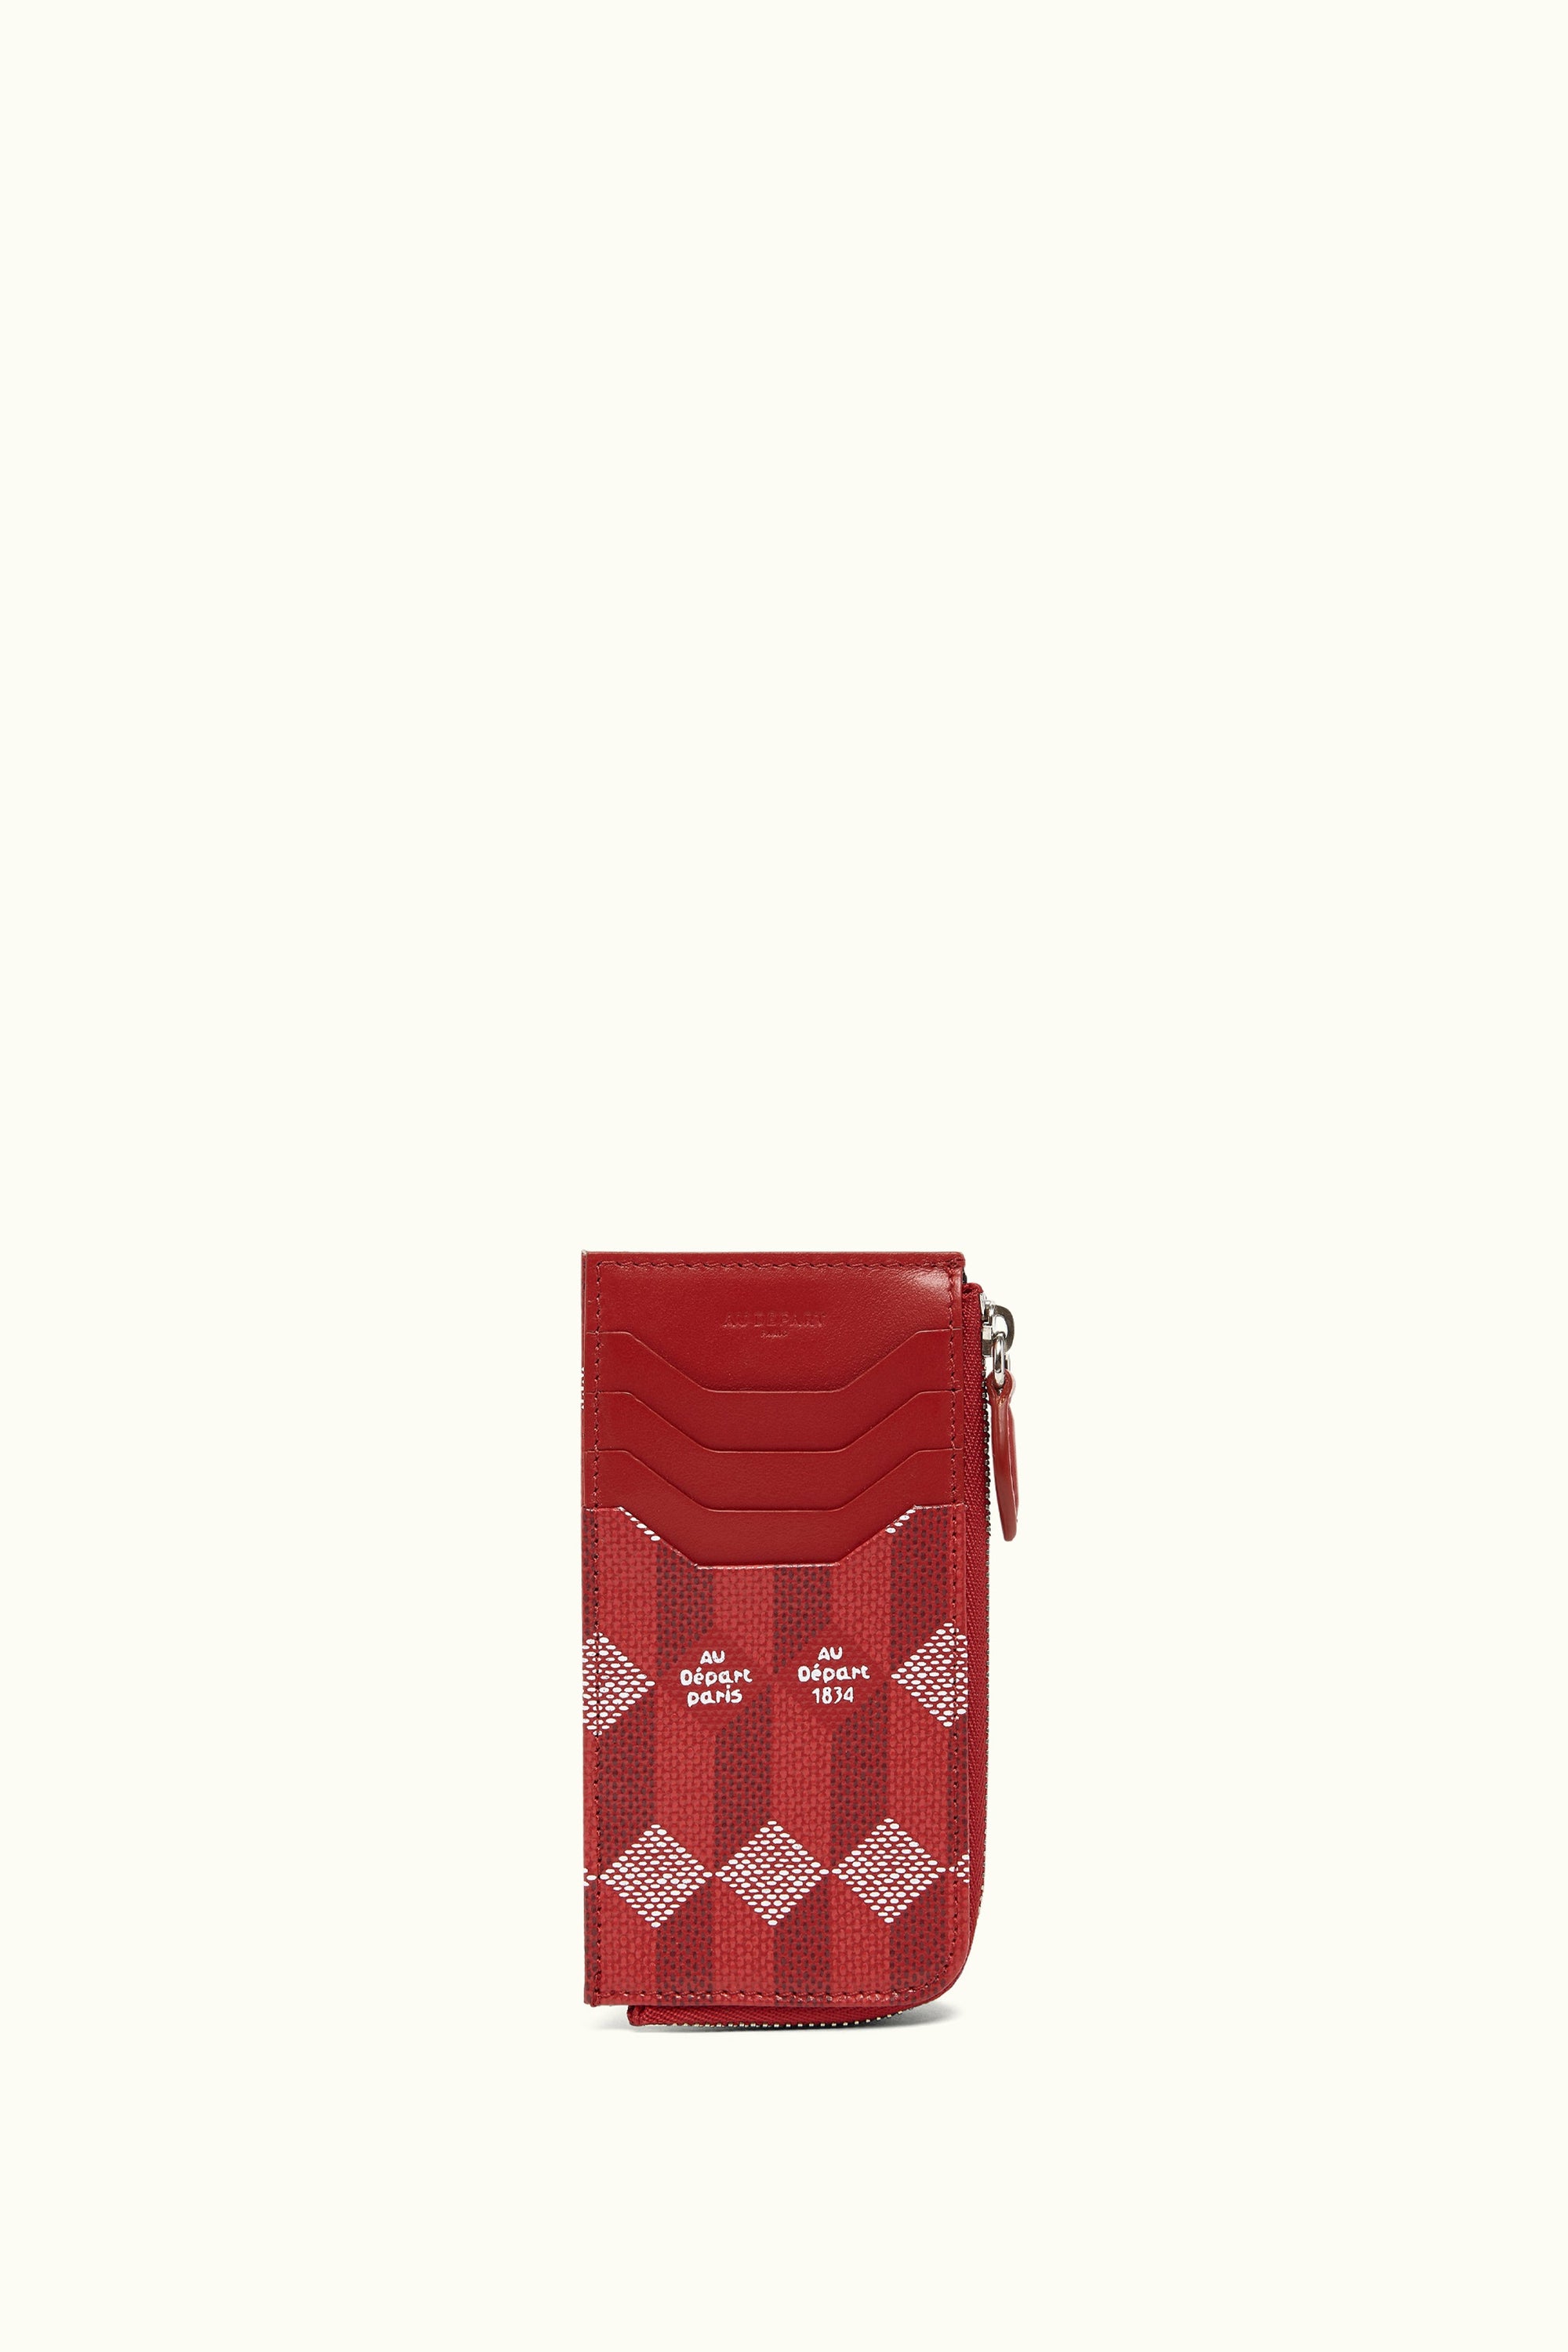 Le Porte-Cartes - Fermeture a Glissiere Coated Canvas Red